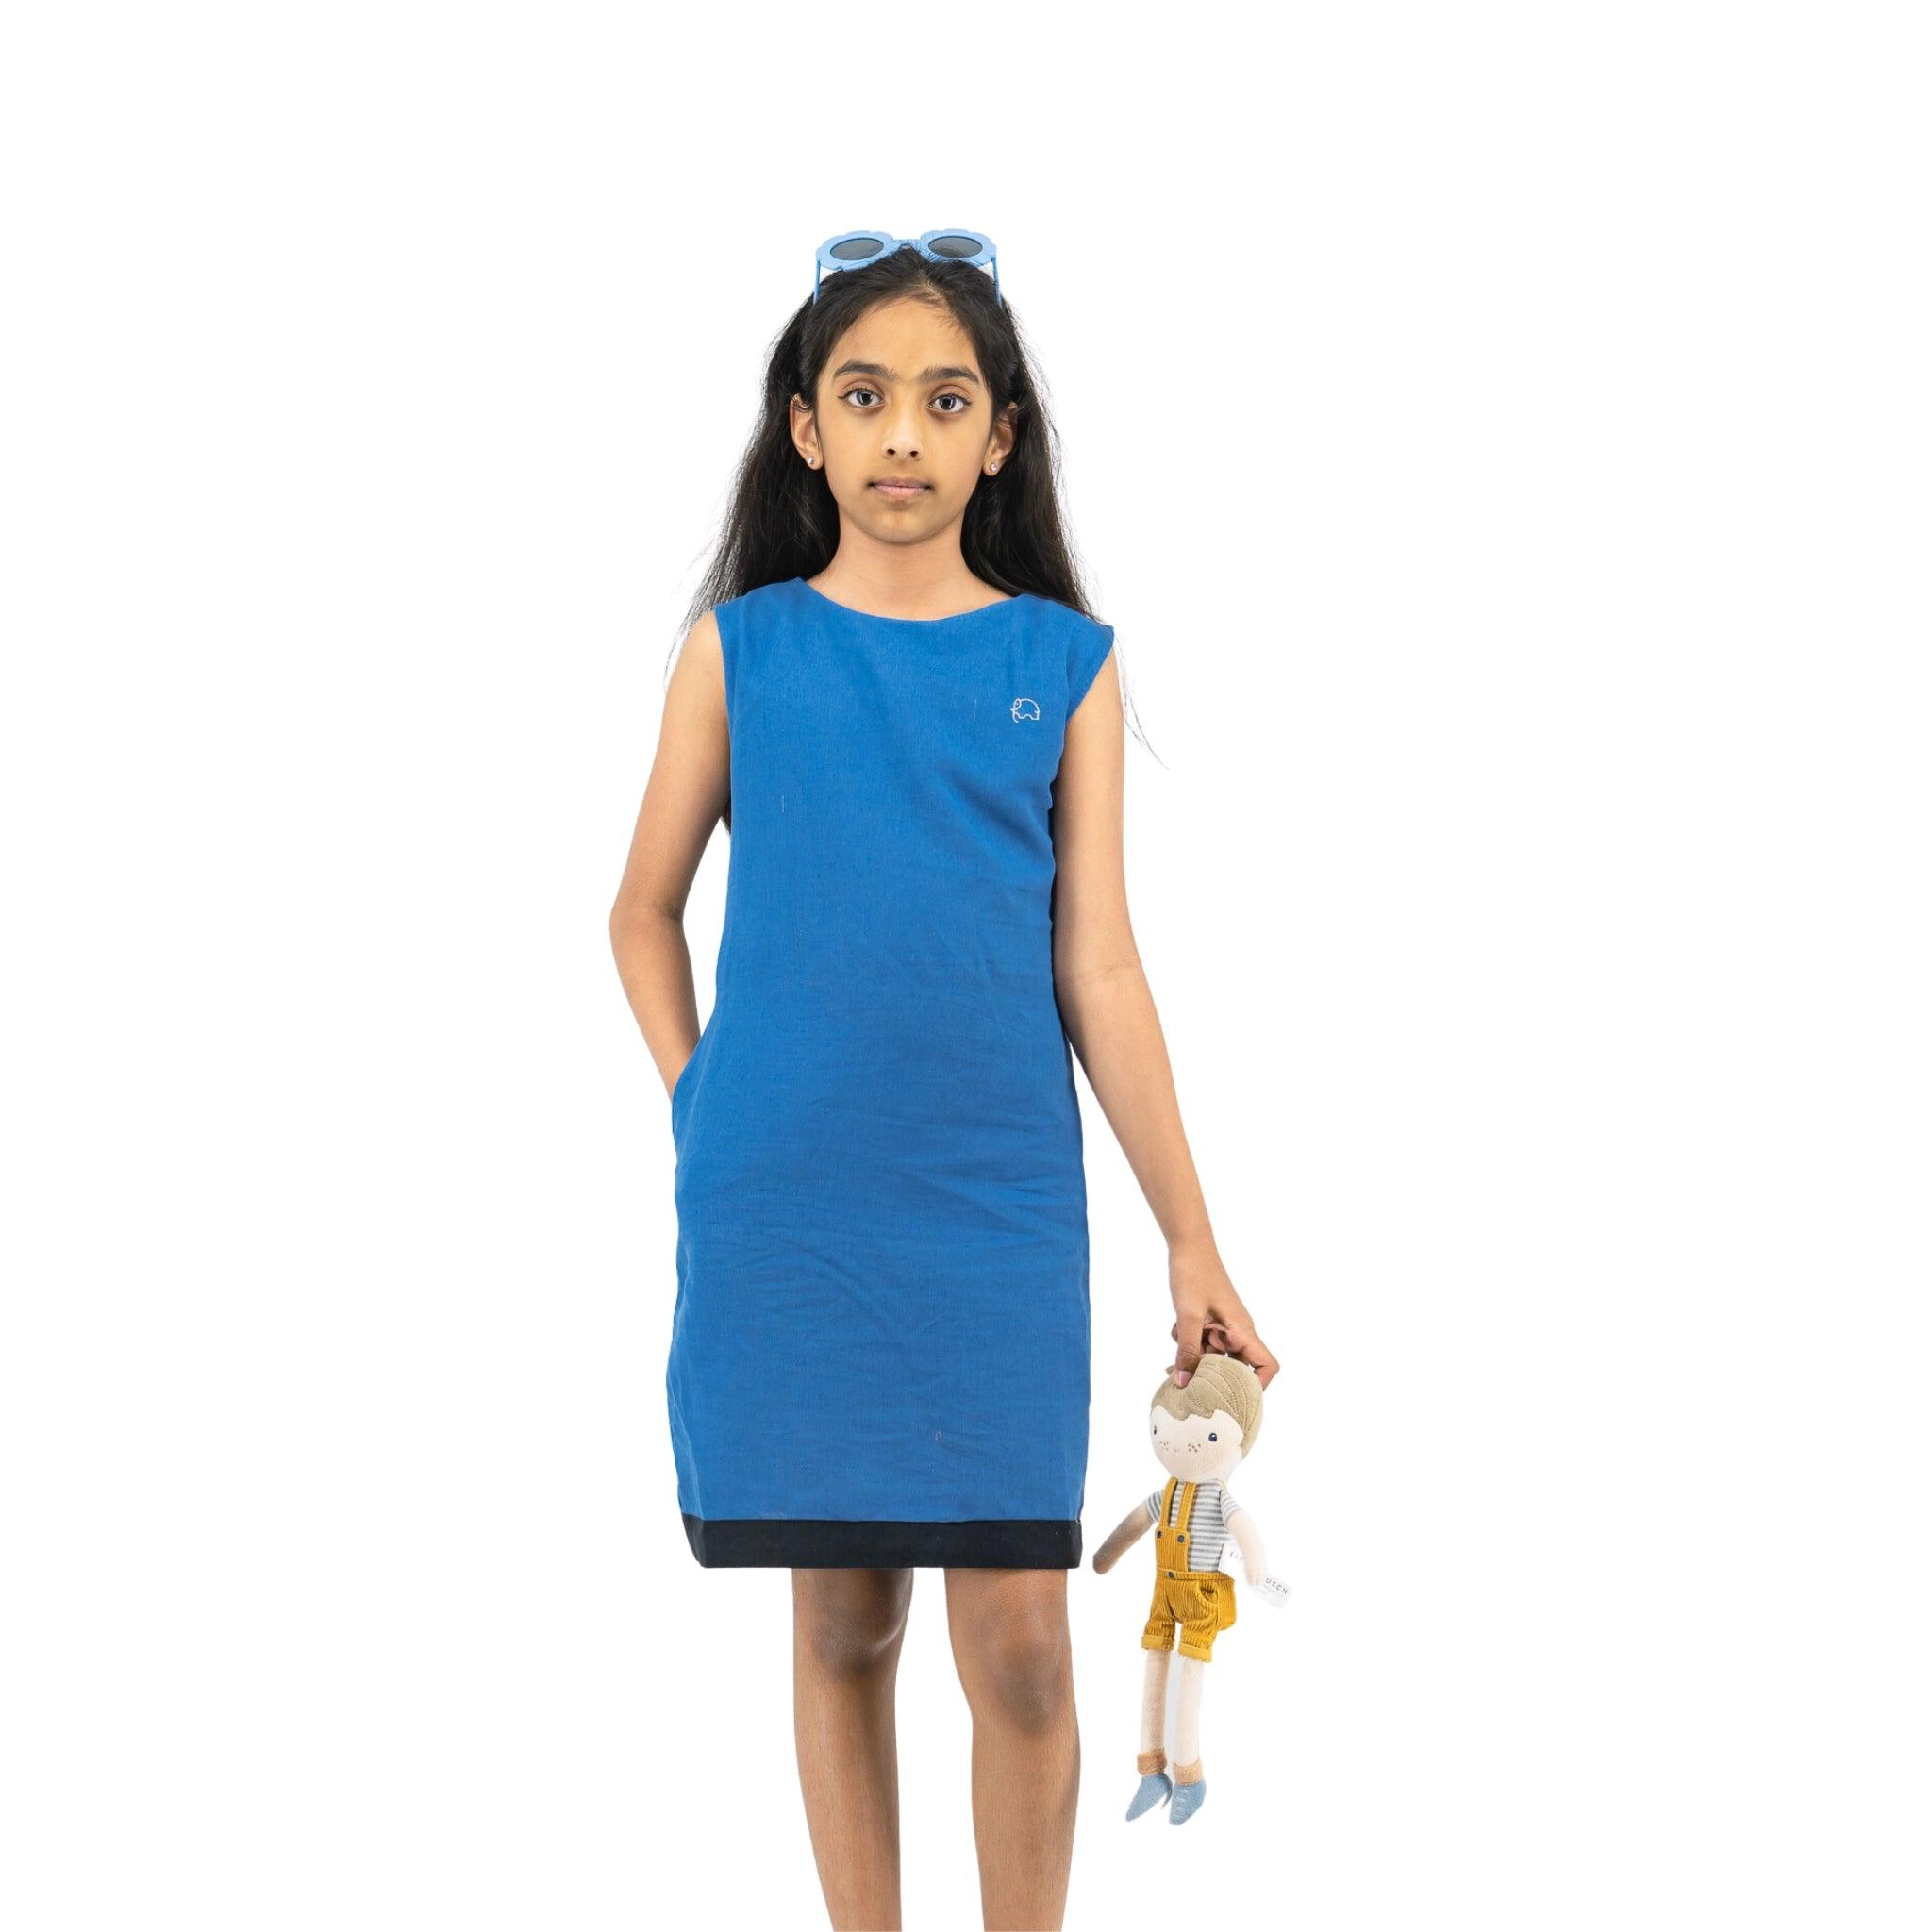 Girl in Karee's Linen Cotton Round Neck Frock for Kids dress with sunglasses on her head, holding a doll, standing against a white background.